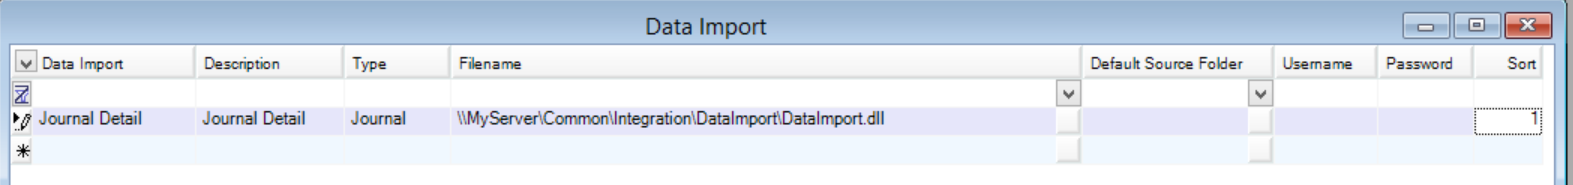 Data Import window; shows the Journal Detail data import information.